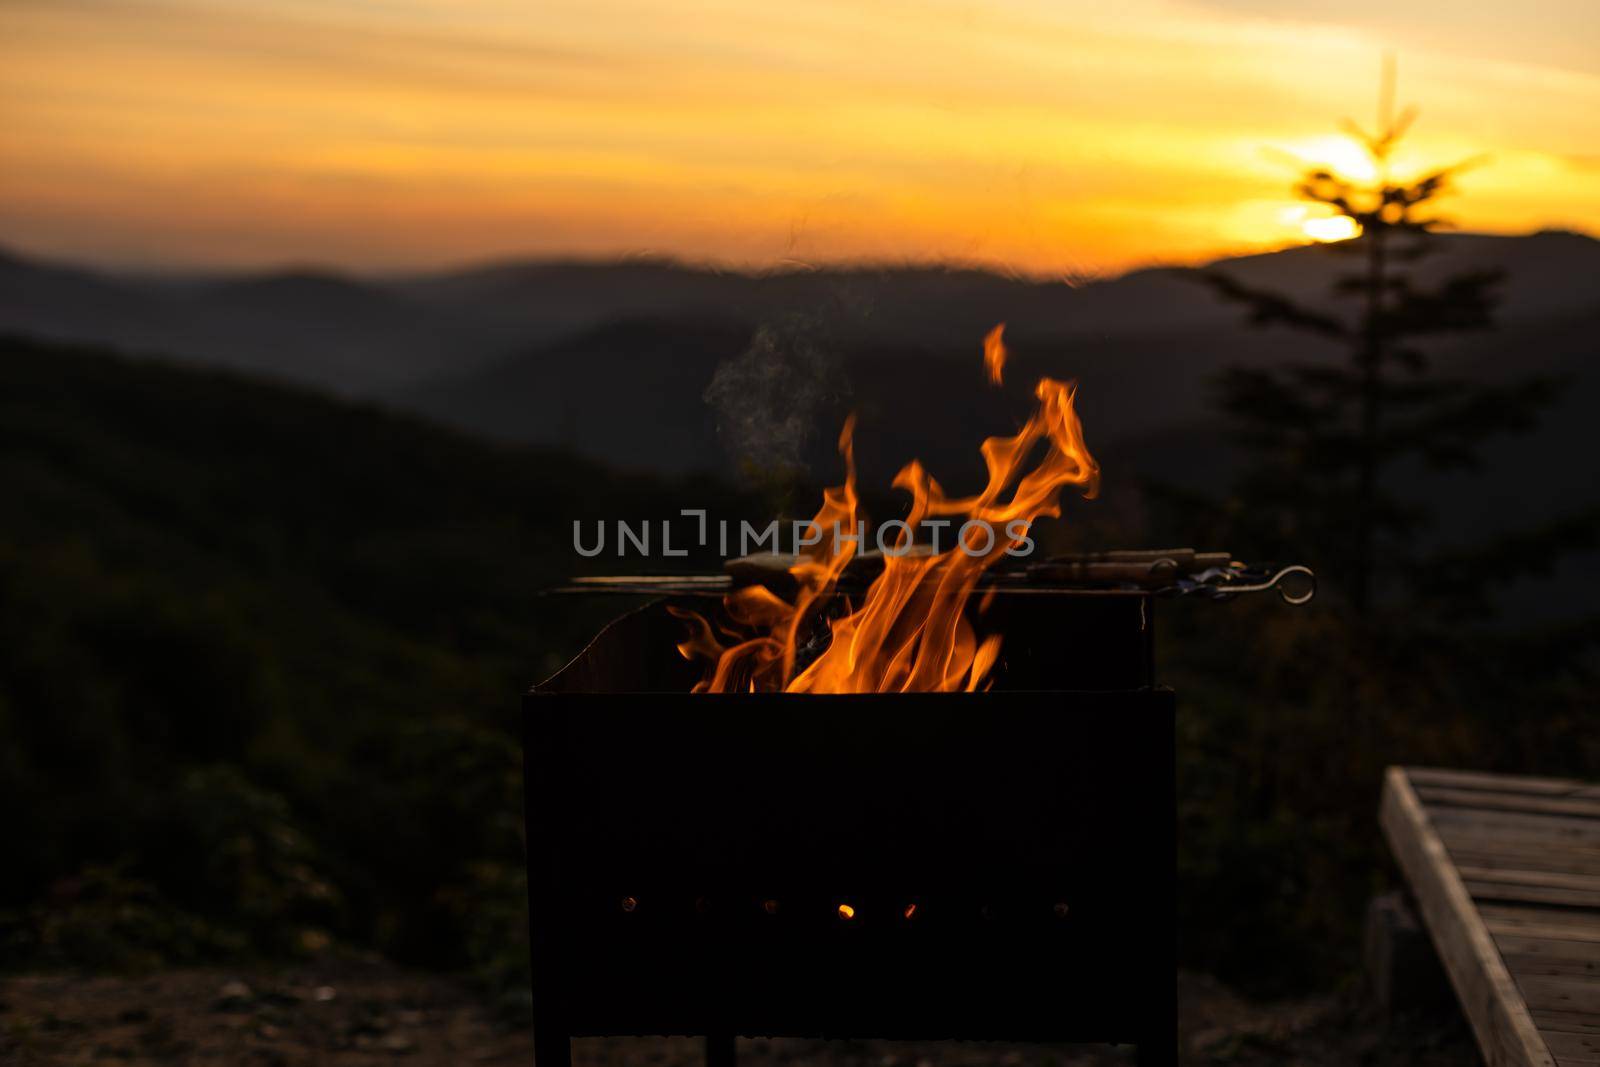 Burning wood at night. Campfire at touristic camp at nature in mountains. Flame amd fire sparks on dark abstract background. Cooking barbecue outdoor. Hellish fire element. Fuel, power and energy